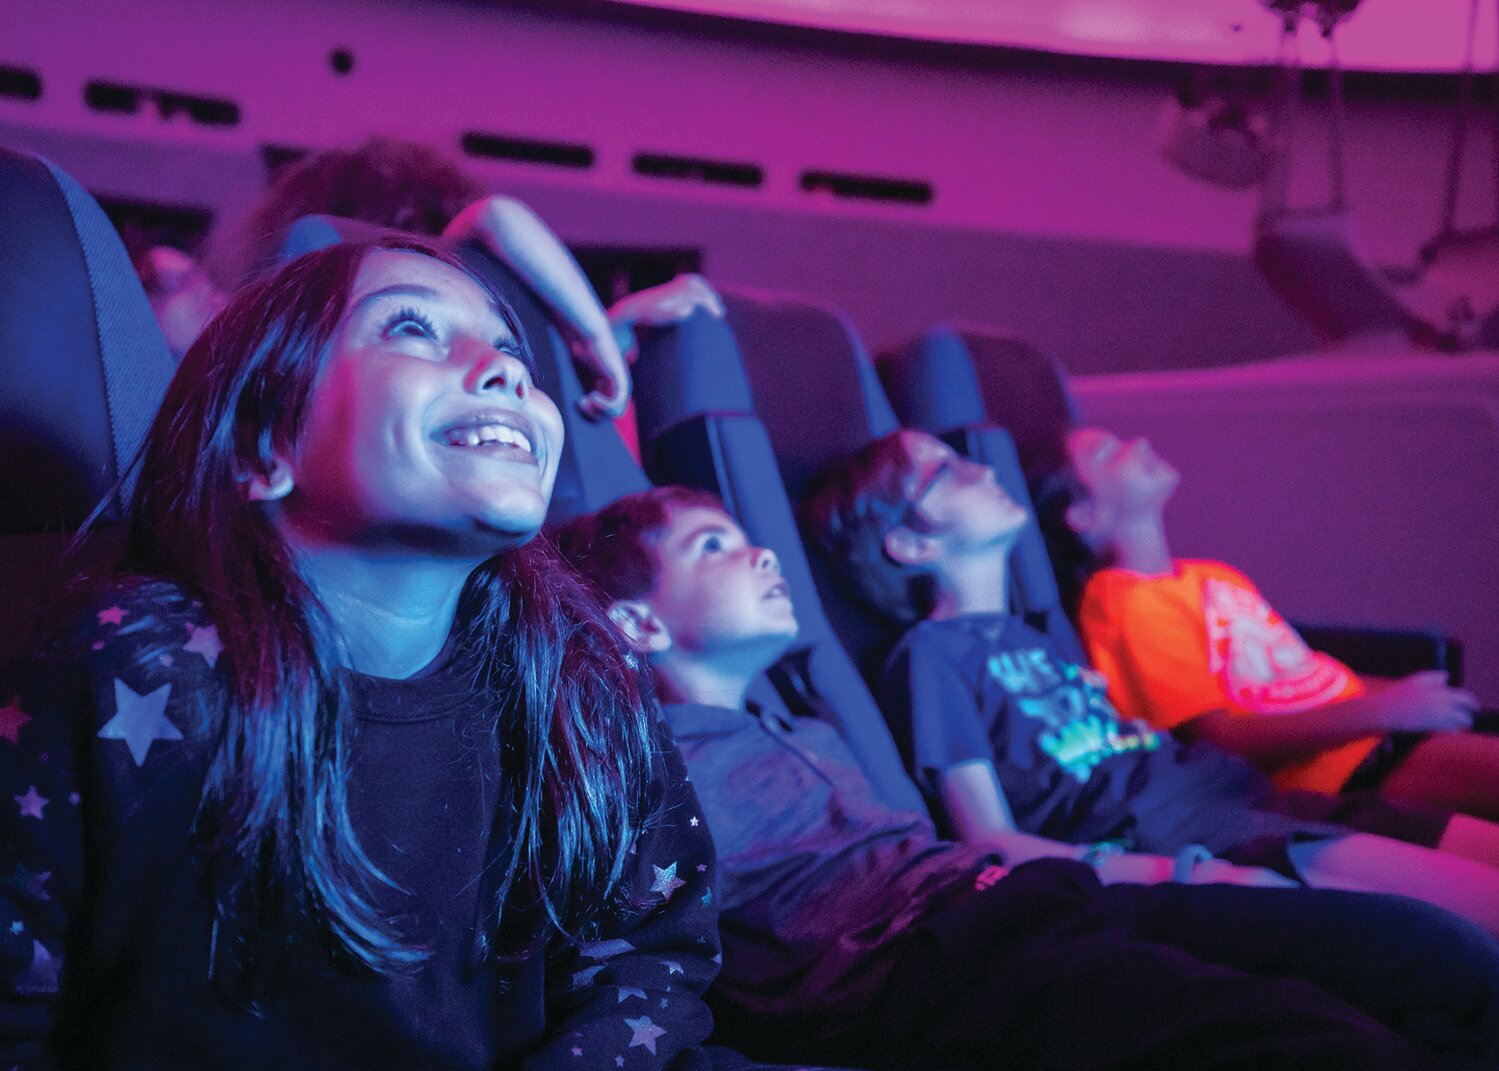 Celebrating more than 30 years of helping local residents explore the night sky and examine humanity’s place in the universe, the Planetarium kicks off each season with an Open House to announce and discuss the year’s upcoming shows and special events.